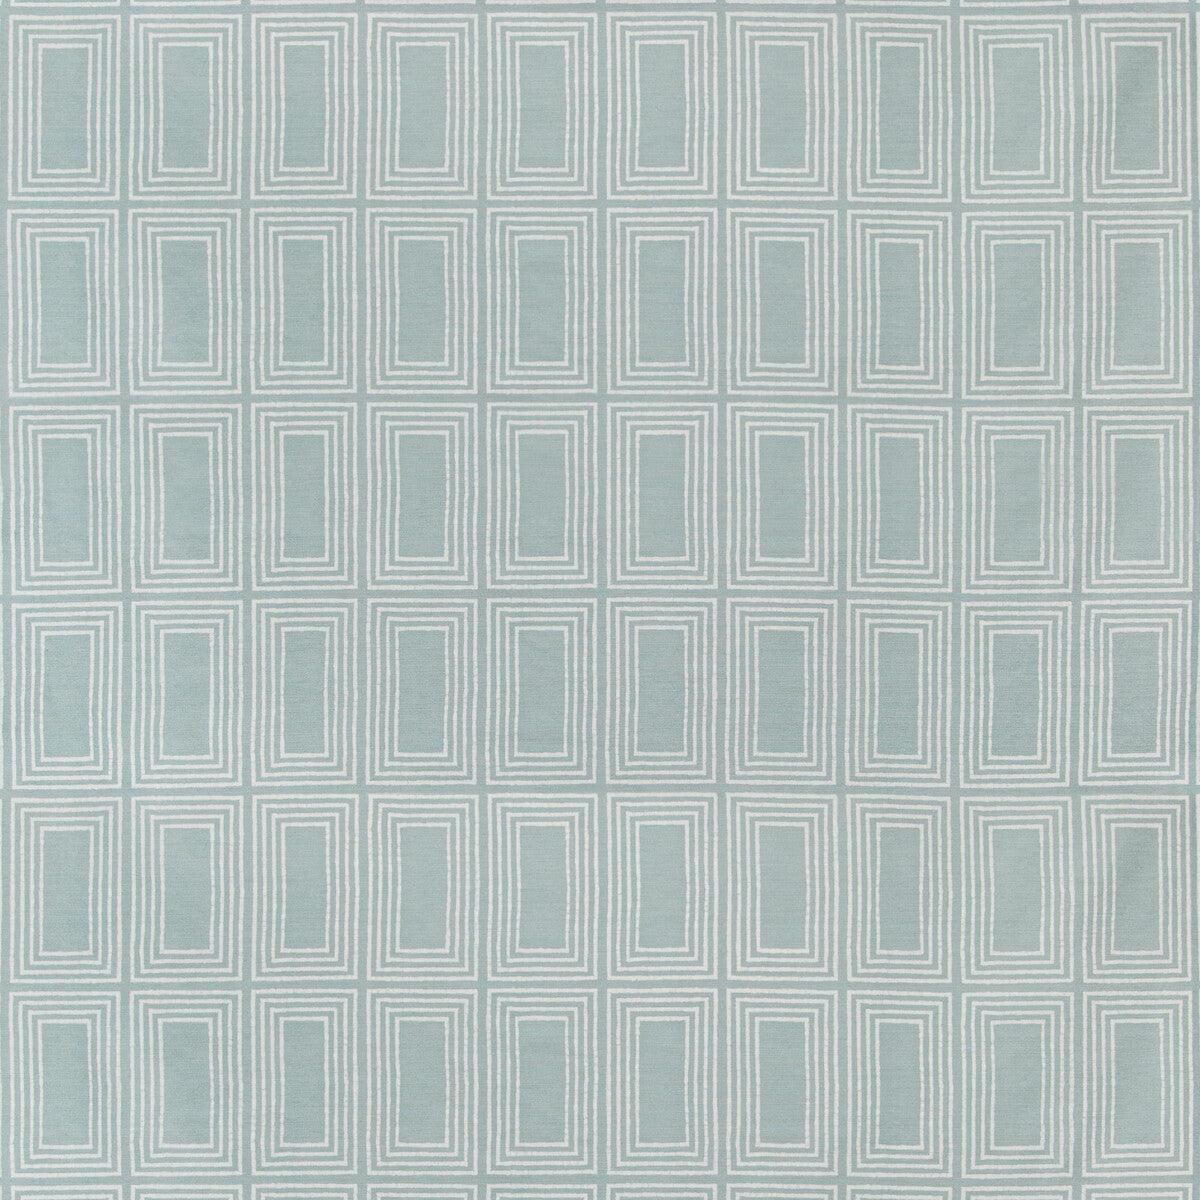 Cadre fabric in seafoam color - pattern 2019126.113.0 - by Lee Jofa